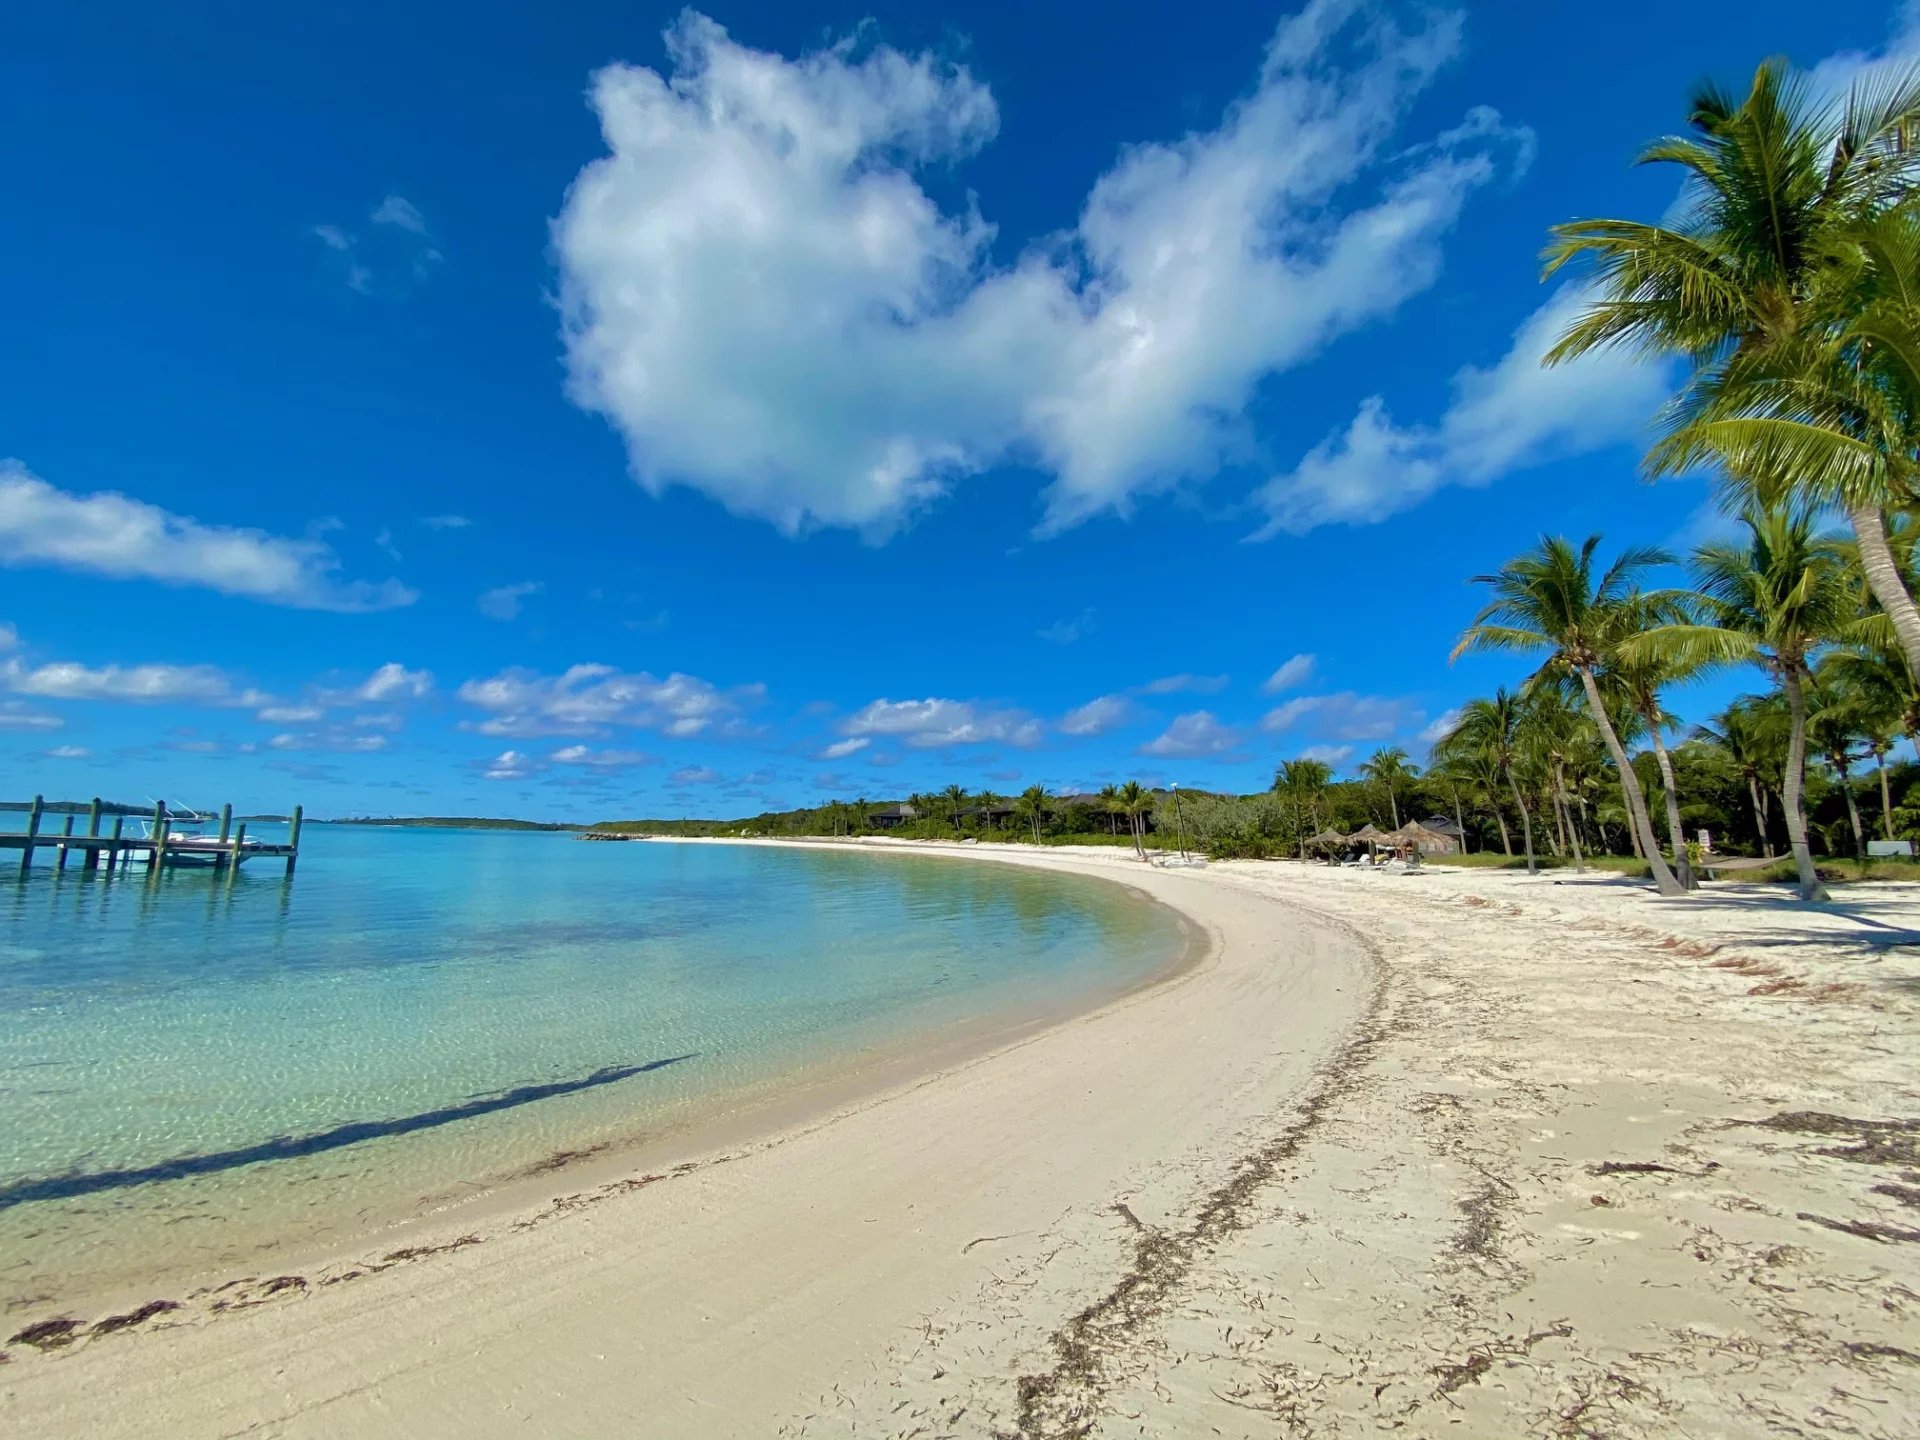 royal island, the perfect private island opportunity - mls 51444 image16